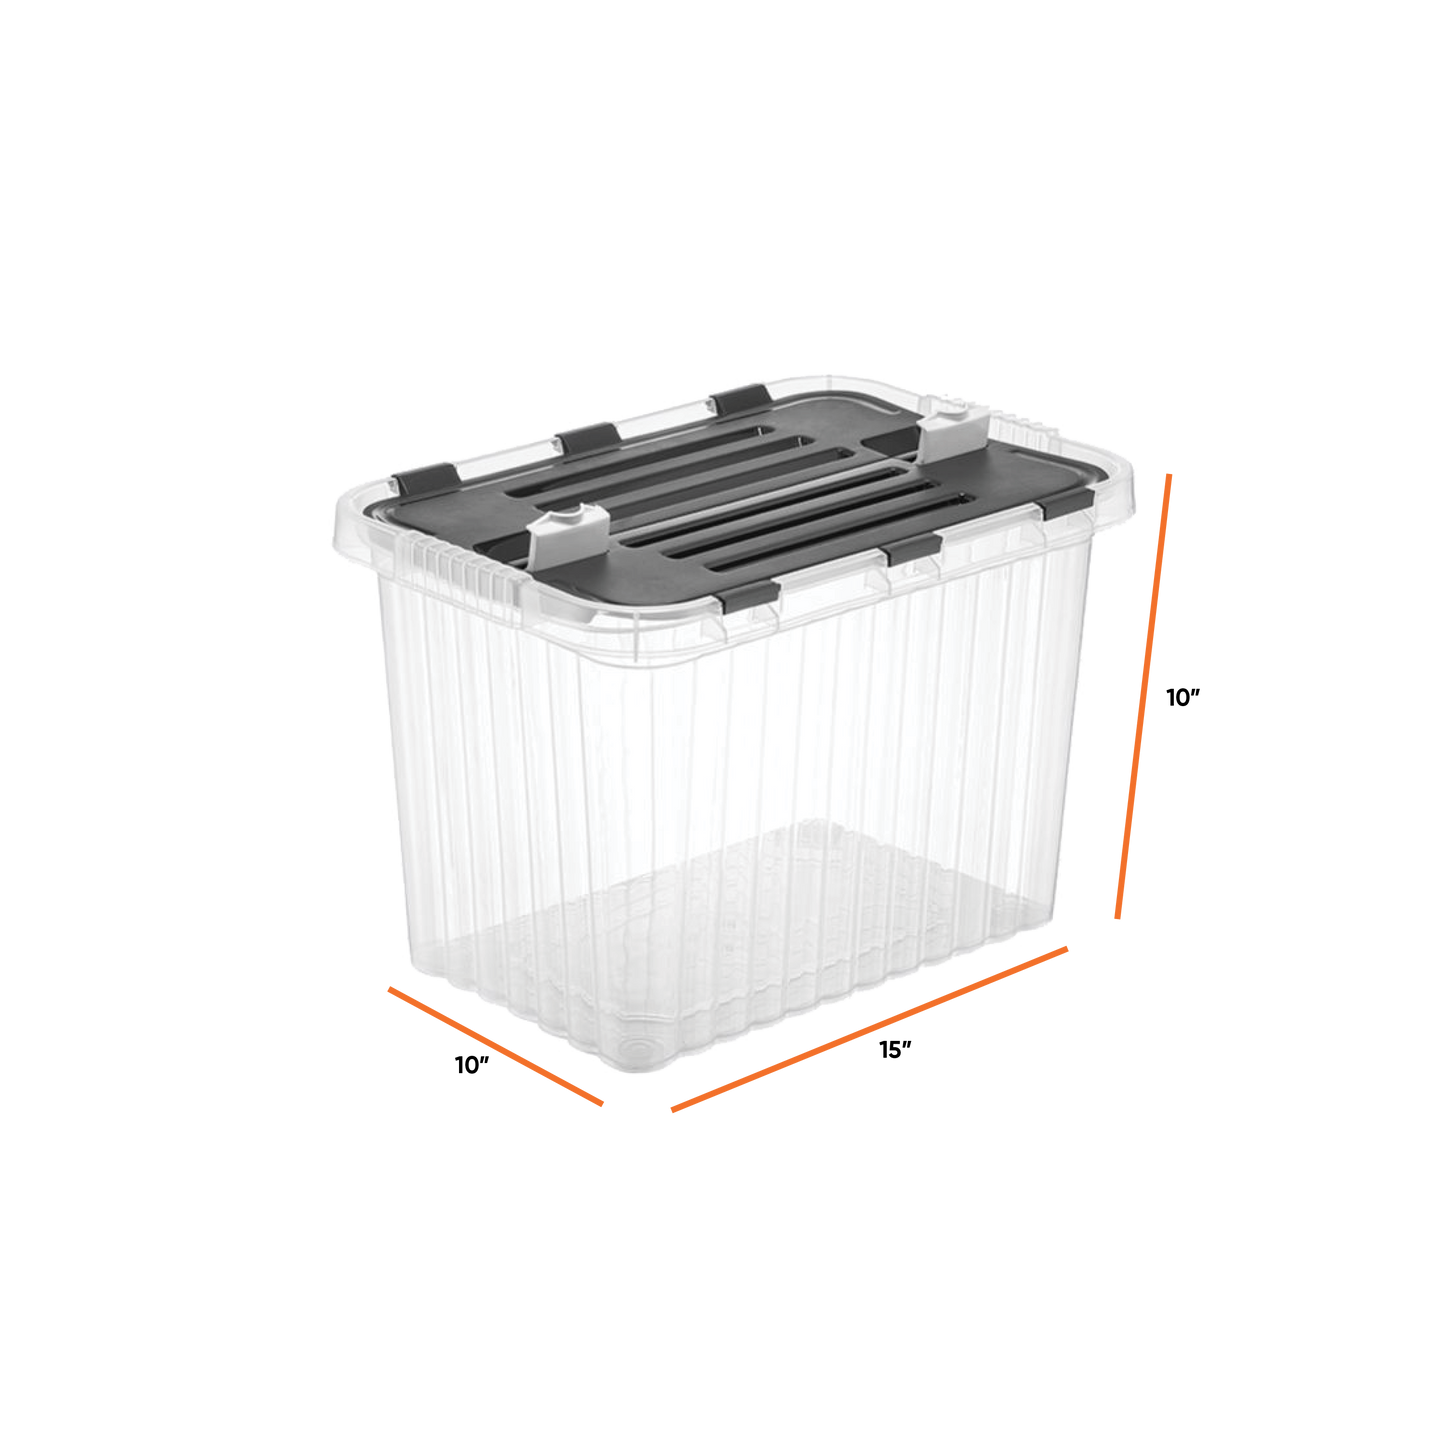 16 L Deep Storage Container with Hinged Lid